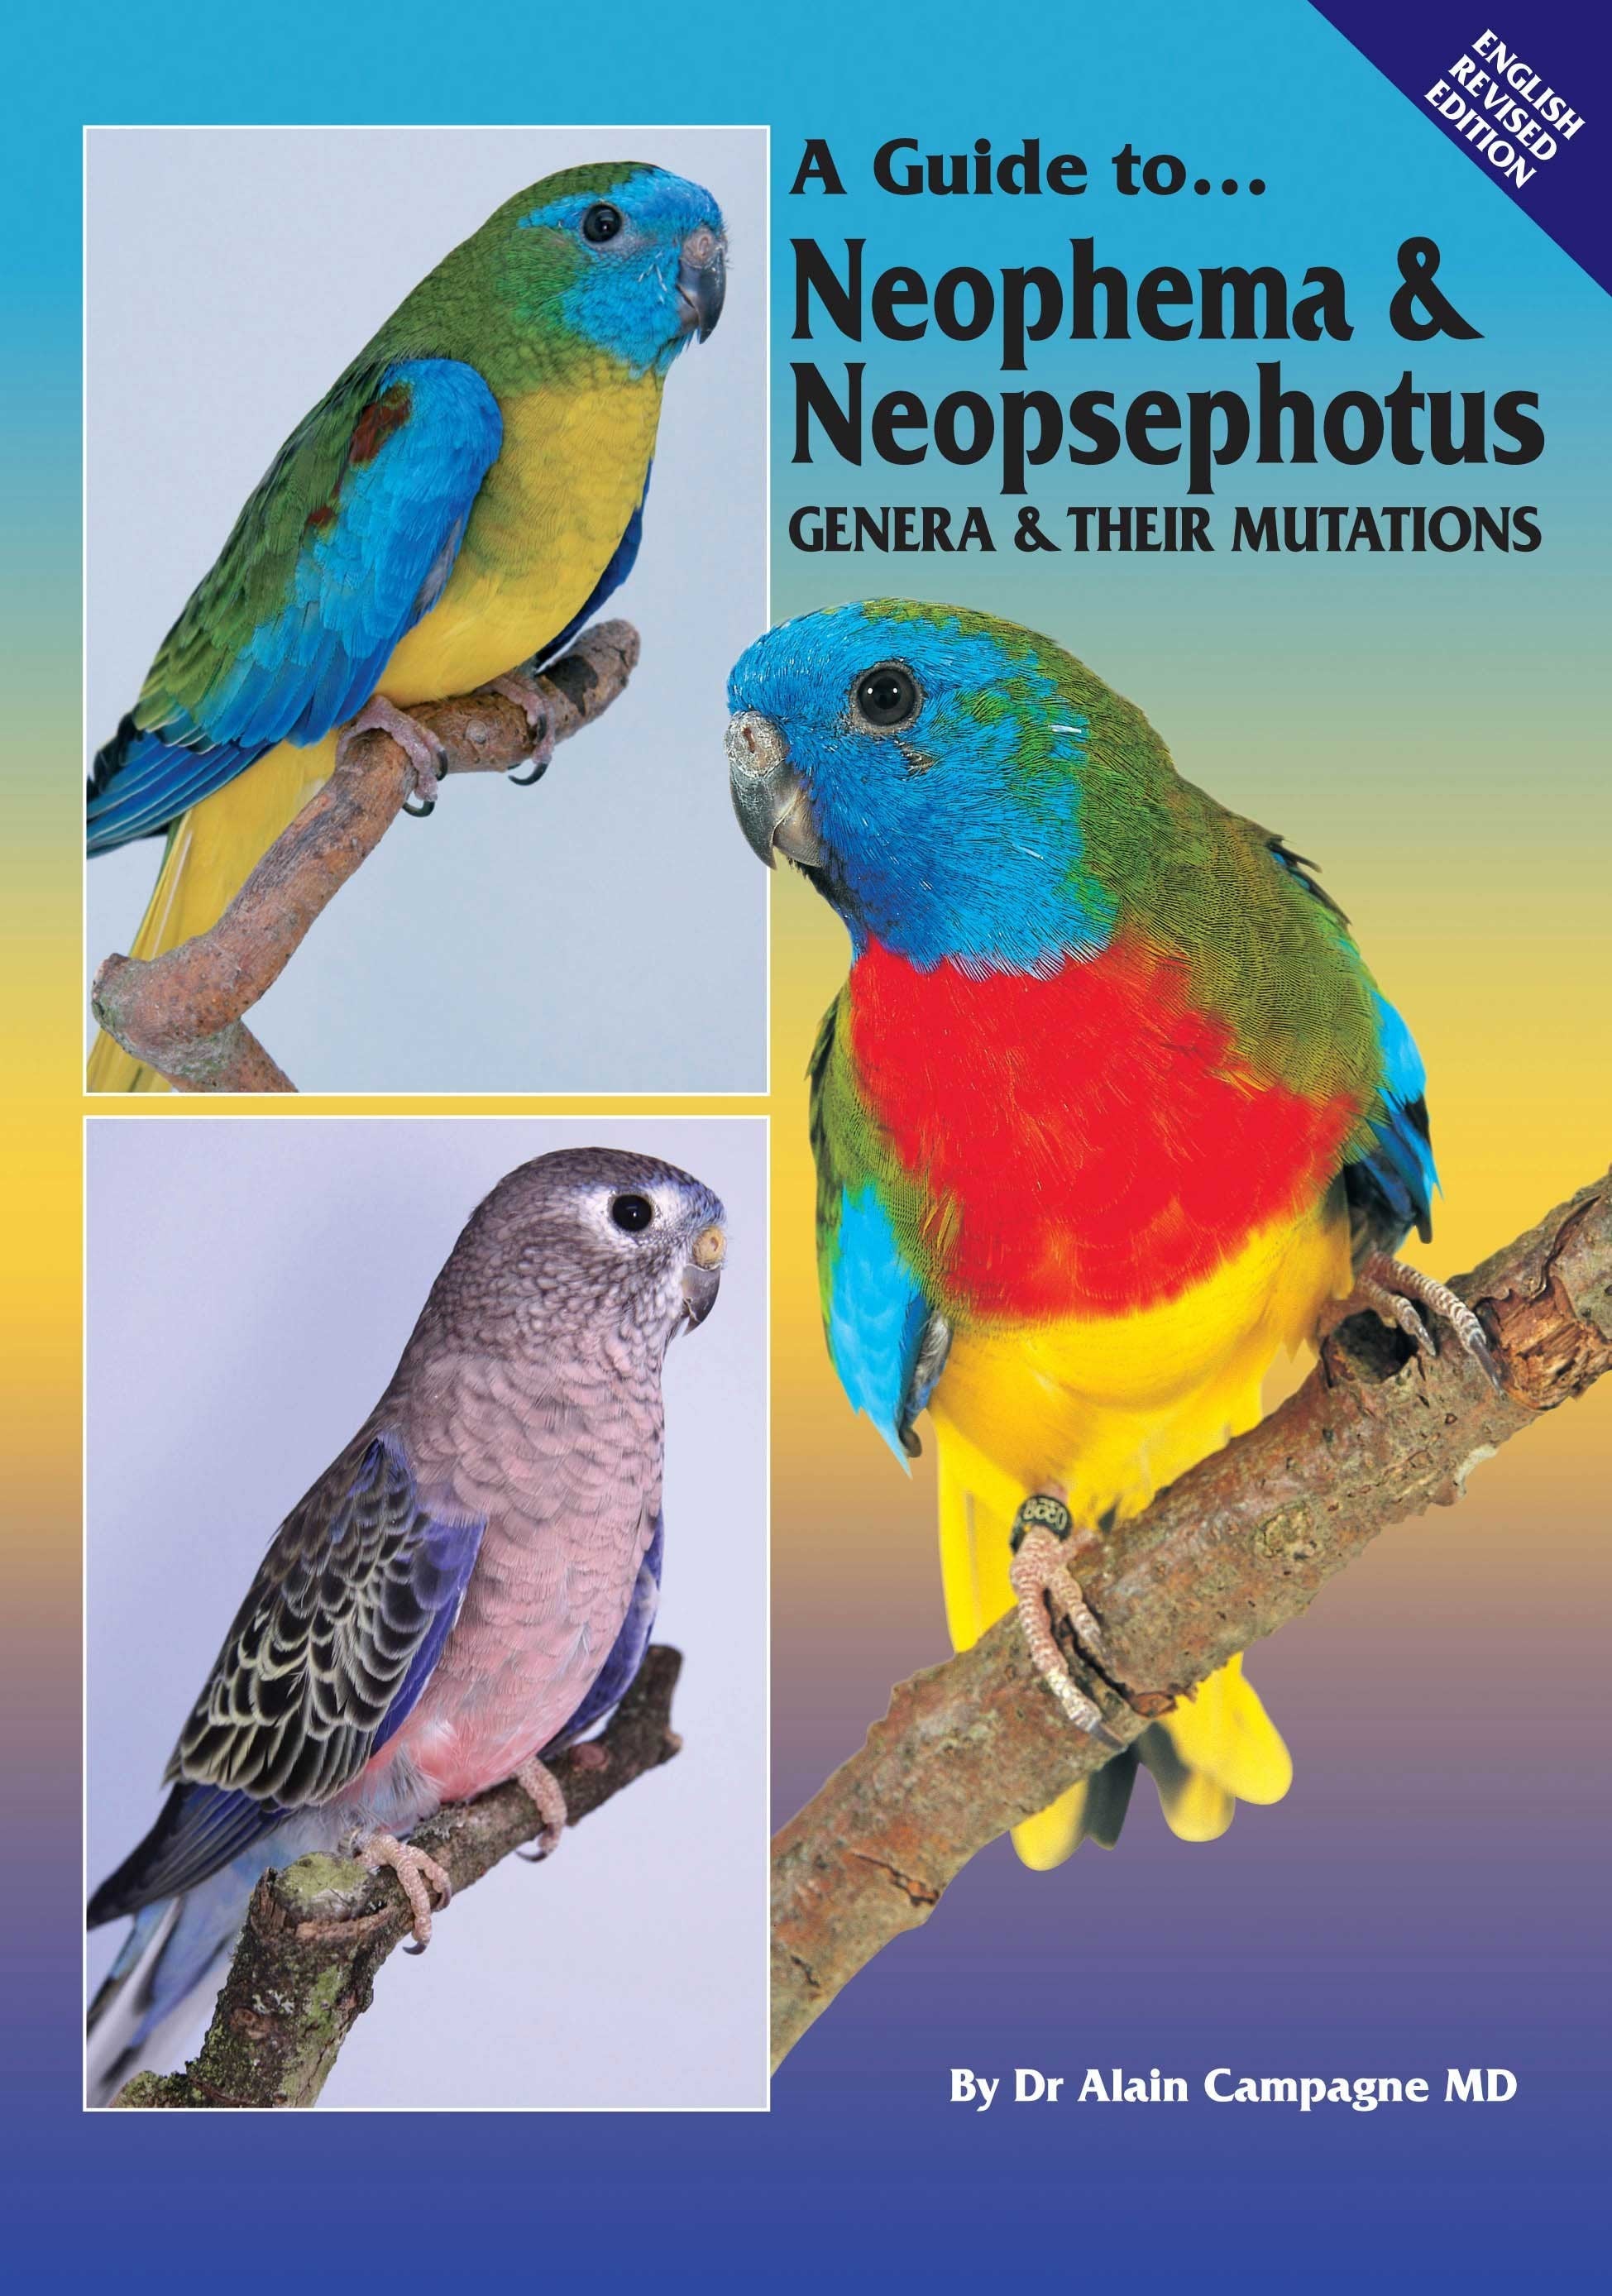 A Guide to Neophema and Neopsephotus Genera (English Revised Edition) Hard Cover